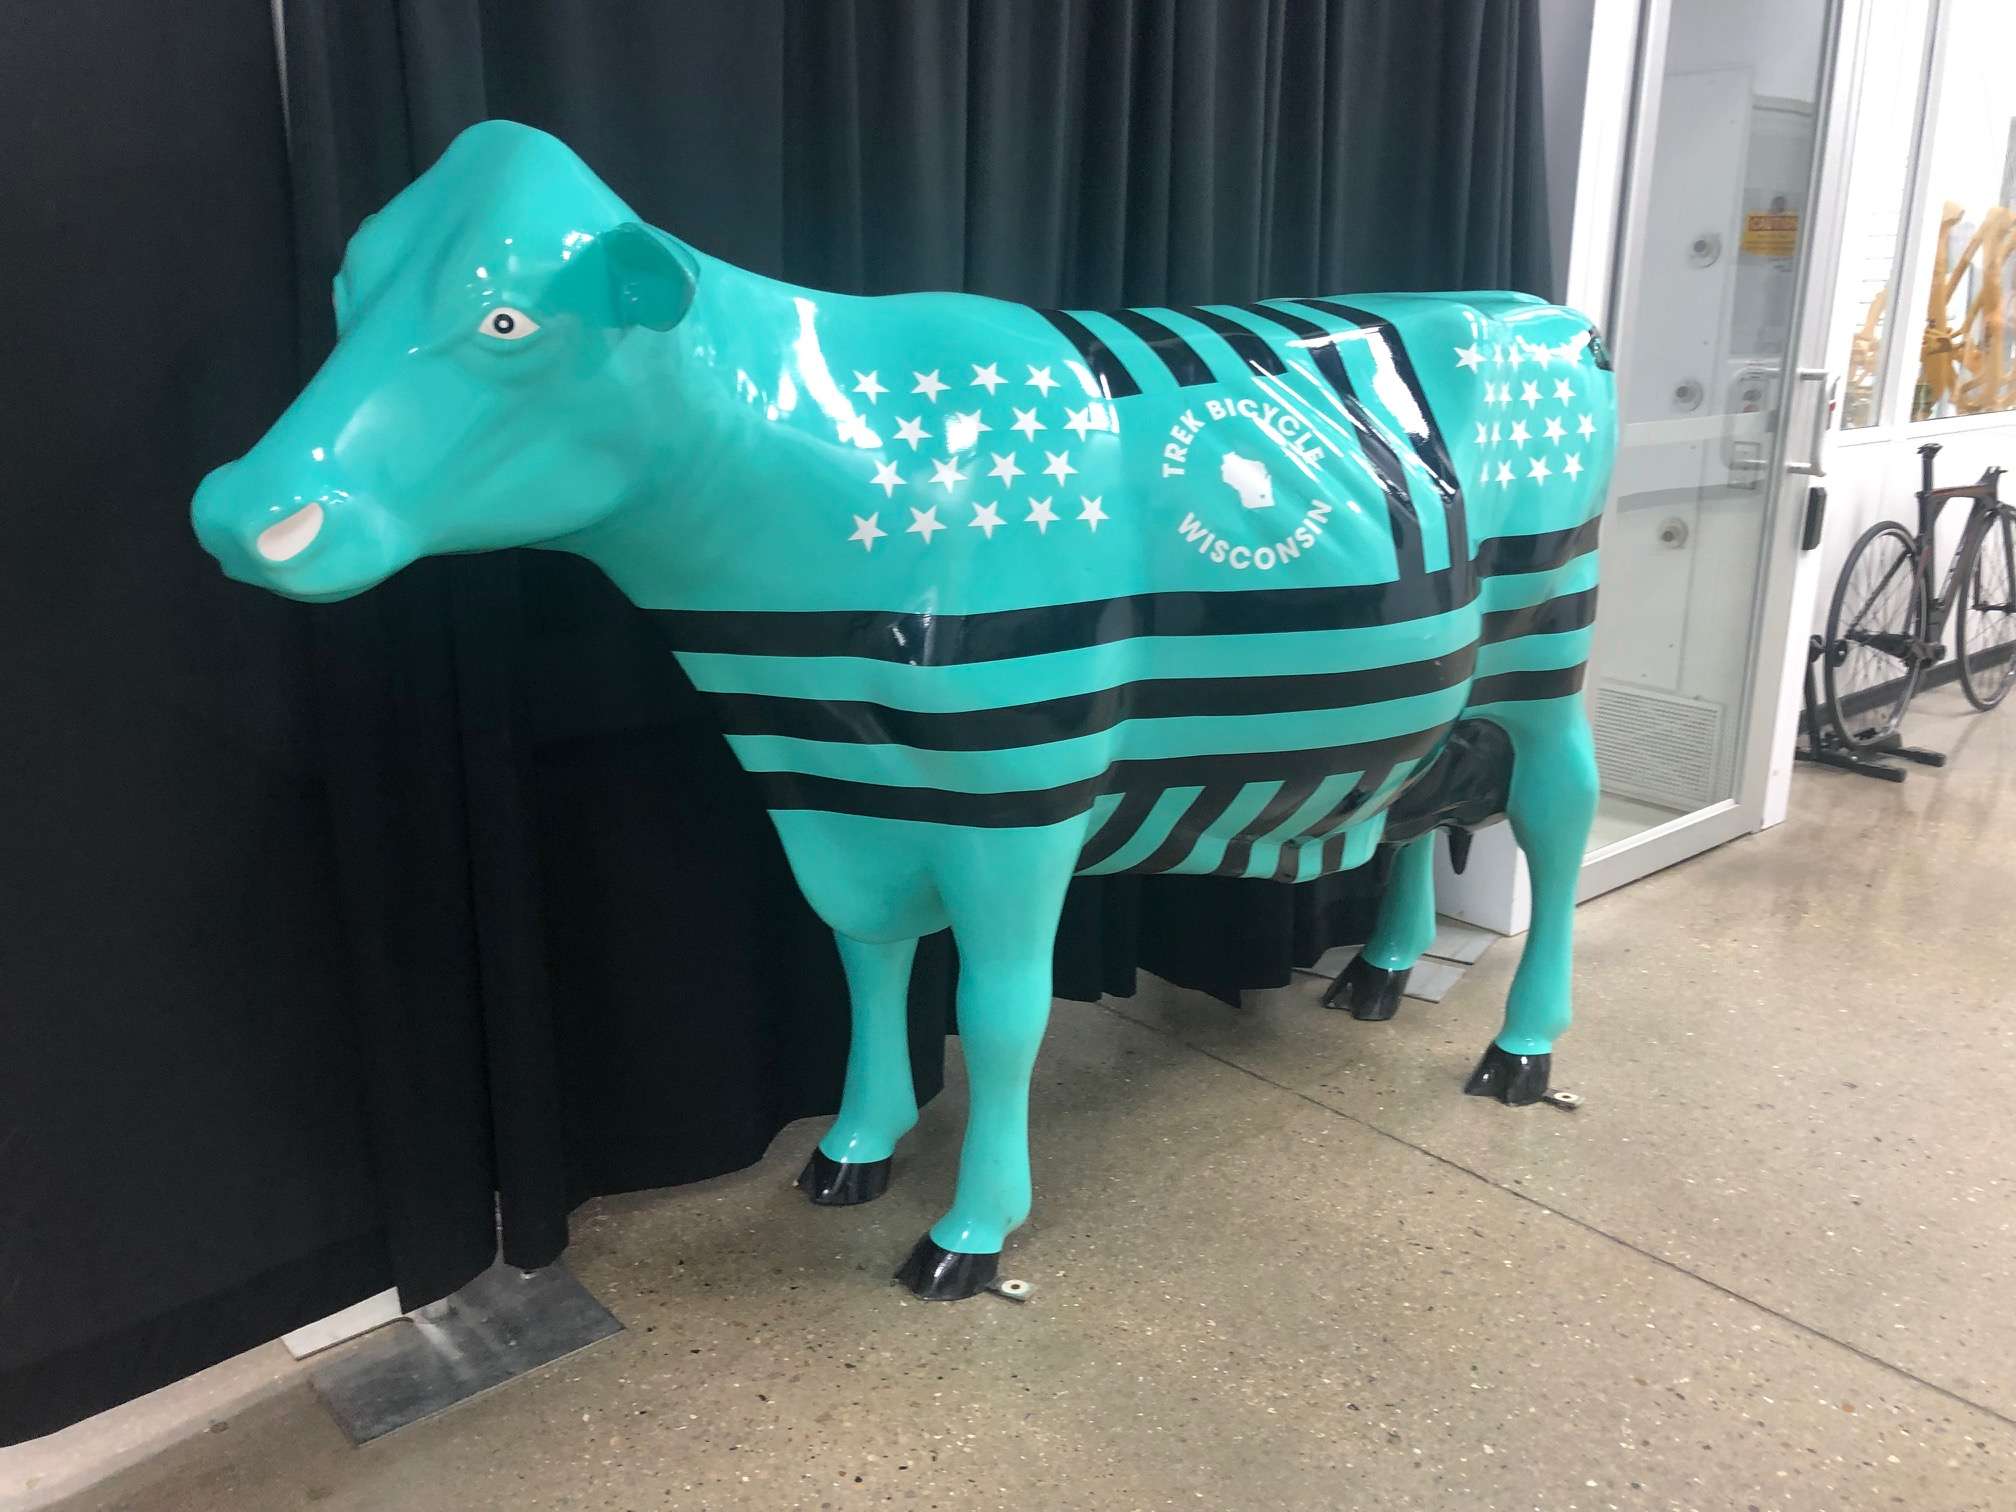 Bright teal cow with black stripes and white stars